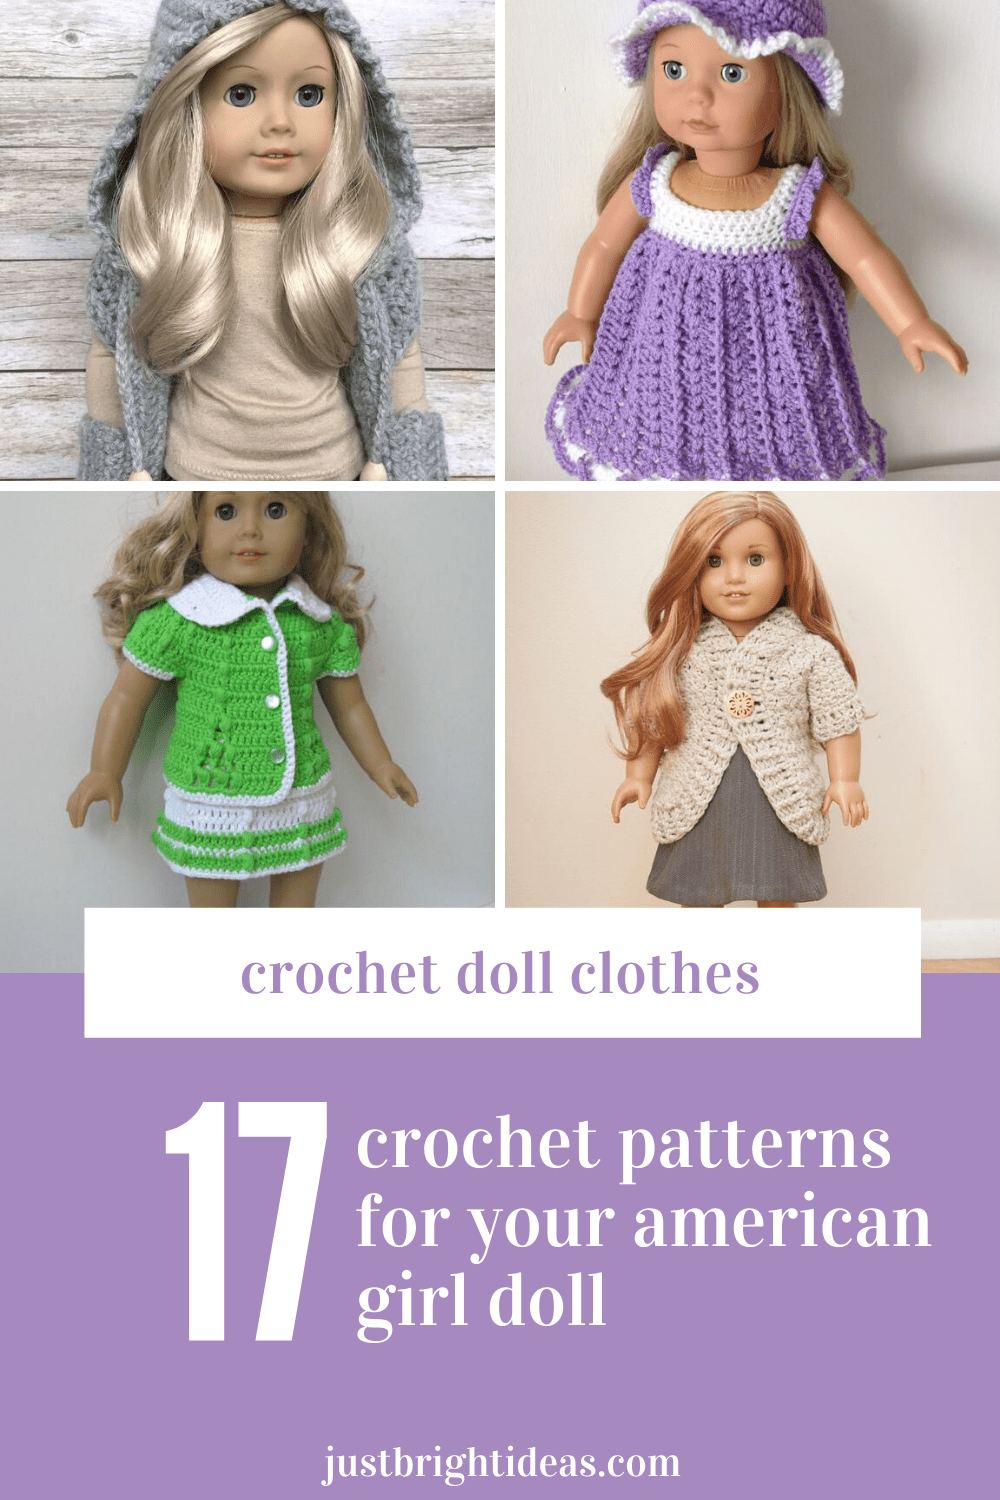 The cute crochet patterns can be used to make outfits for your American Girl or other 18 inch doll. Everything from bathing suits to wedding dresses!